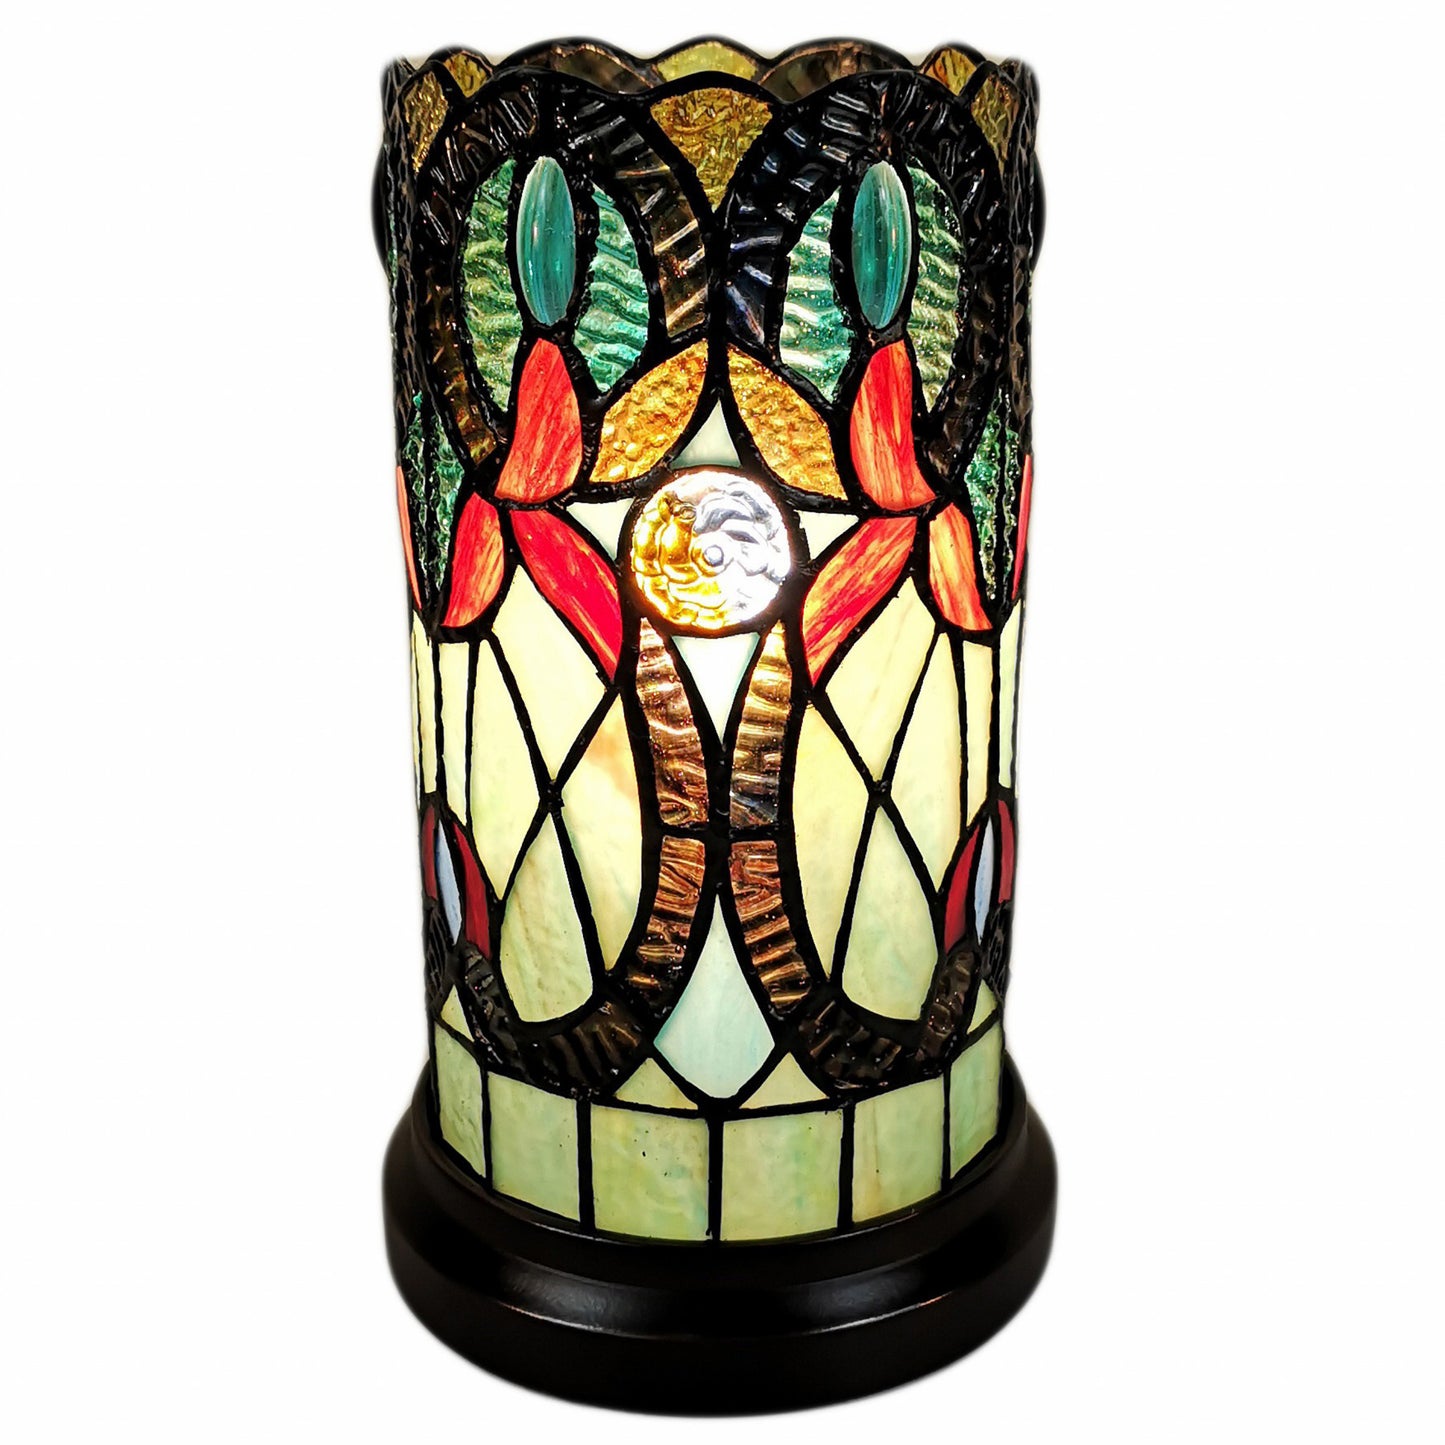 11" Beige and Orange Mosaic Tile Stained Glass Accent Lamp